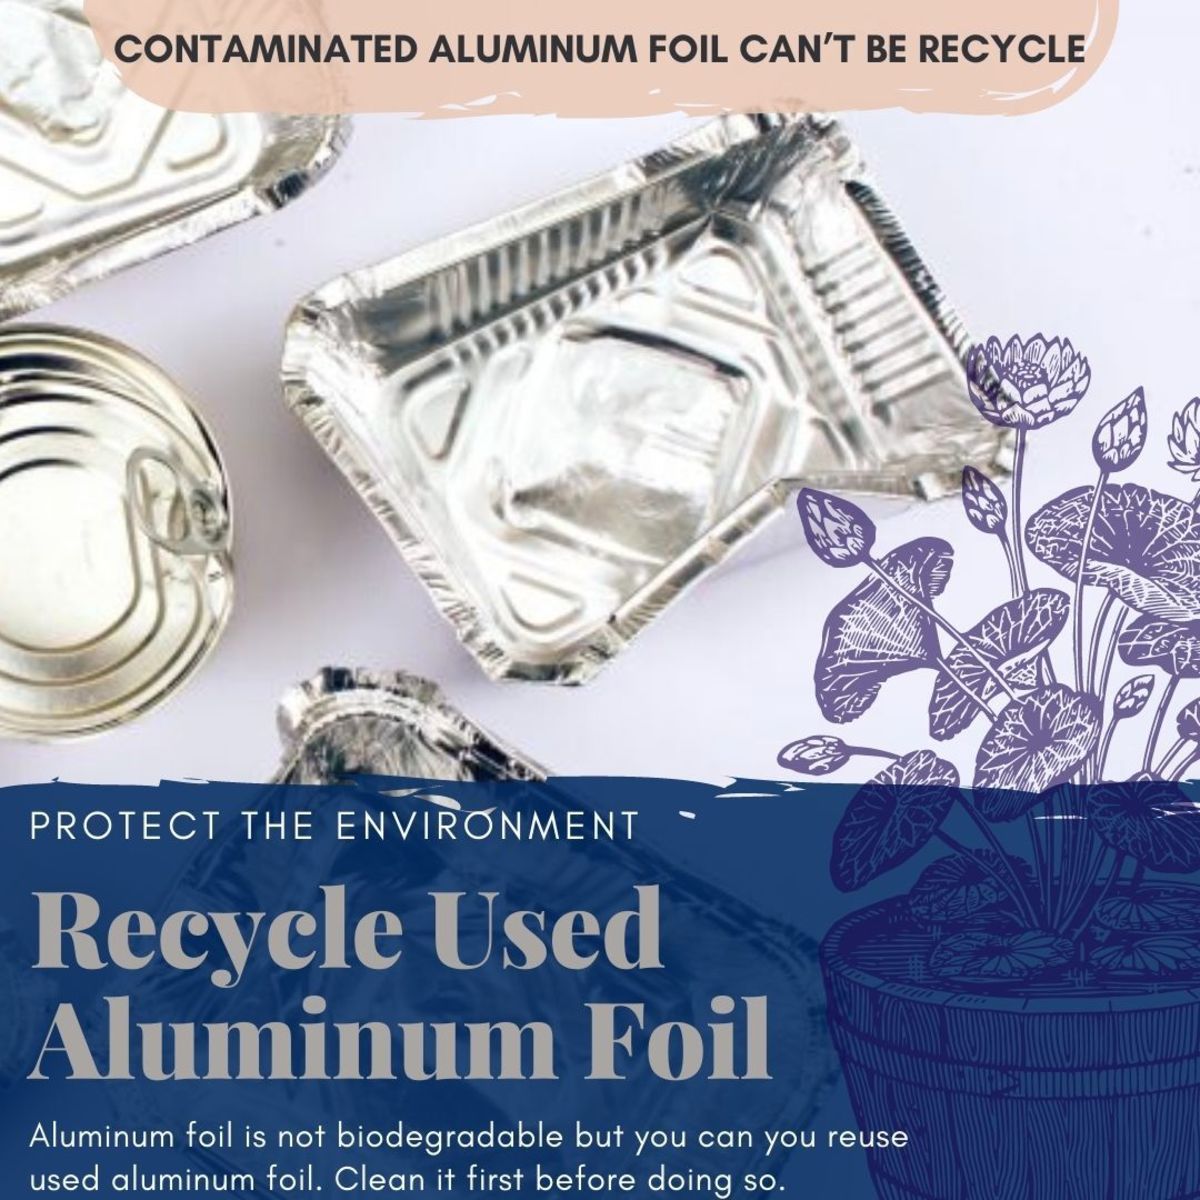 Is aluminum foil recyclable and is it bad for the environment?